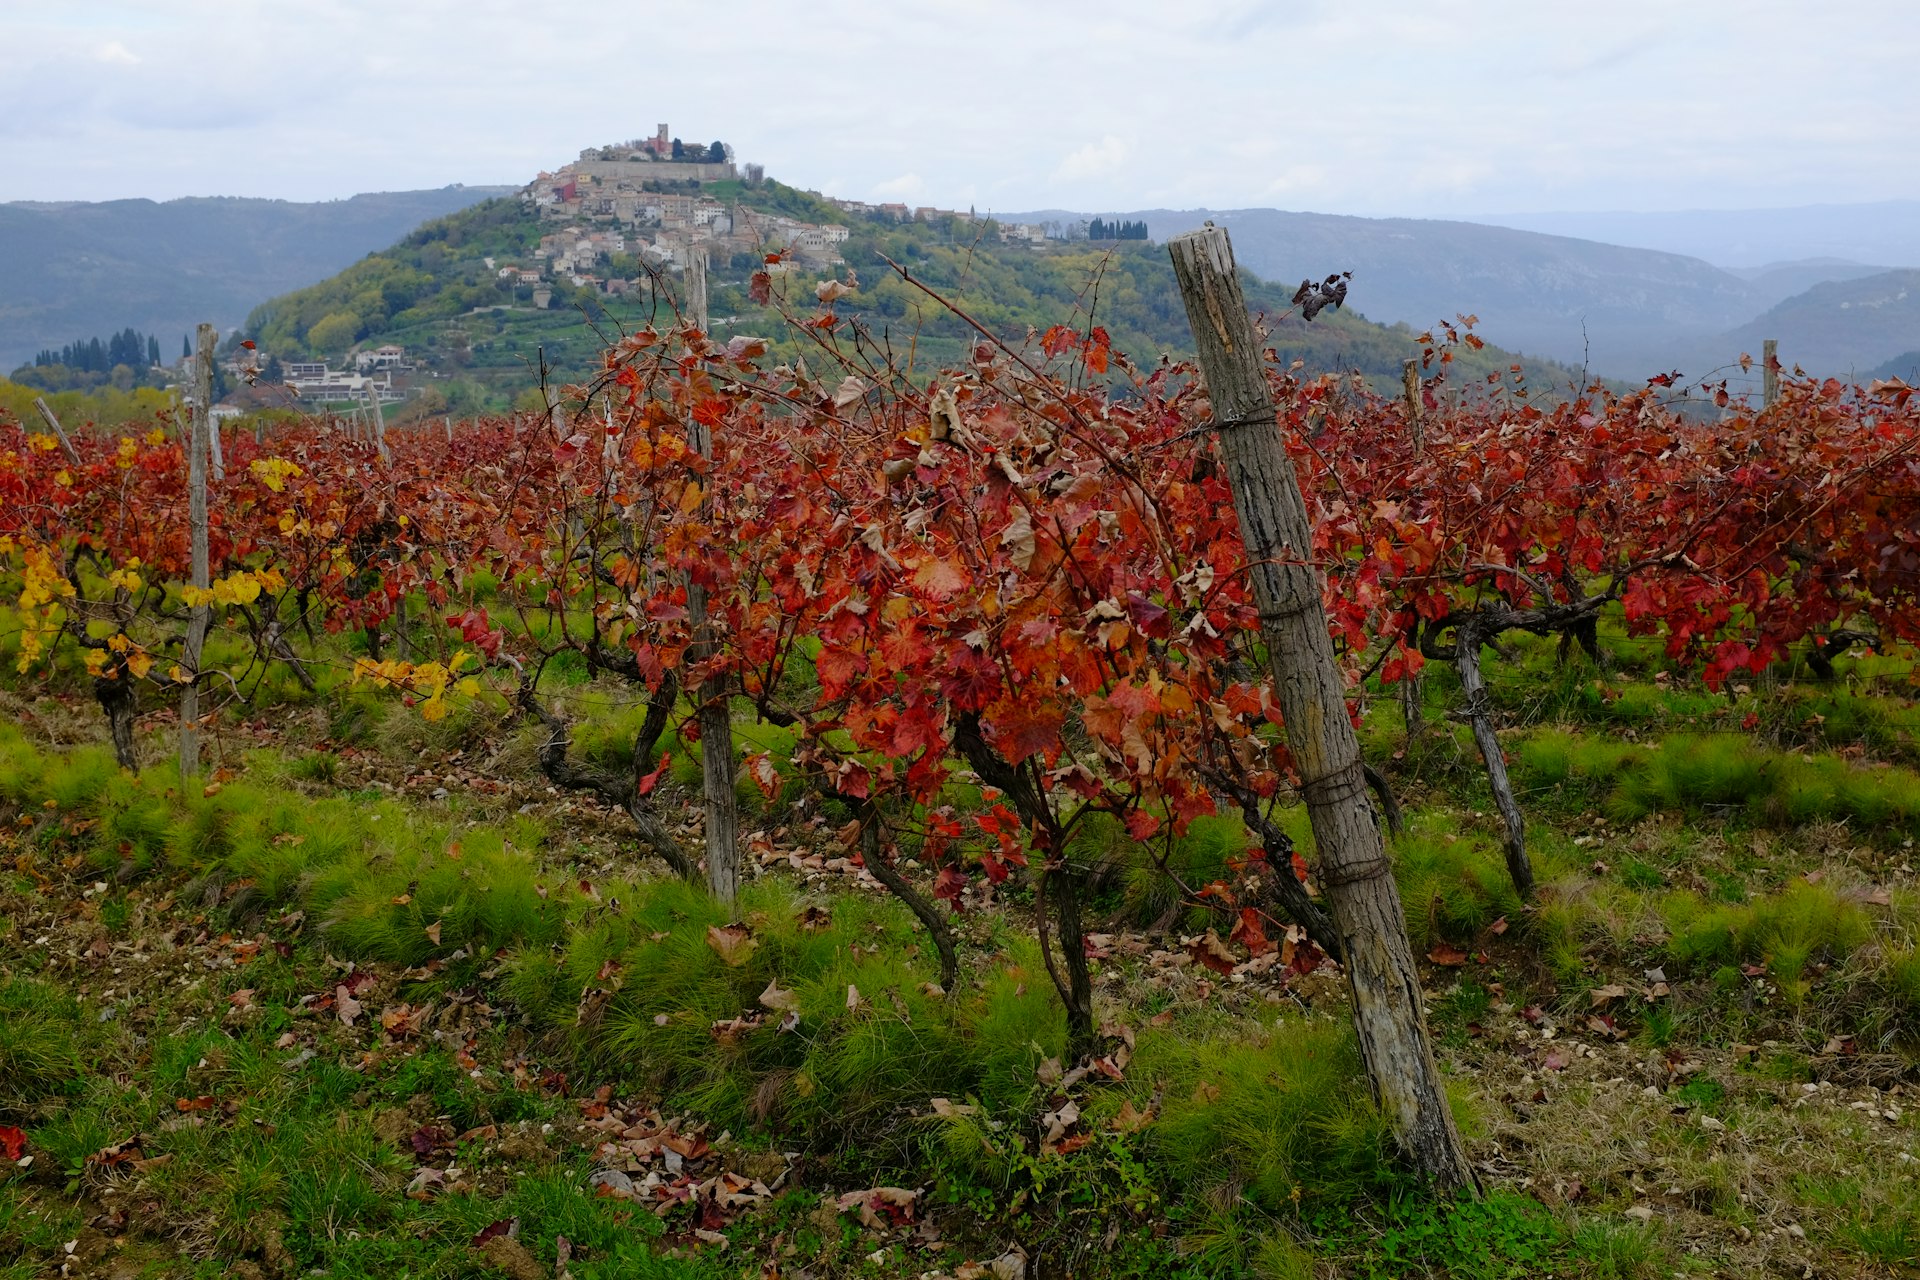 Red autumn leaves drape the grape vines in this vineyard on a hillside in view of Motovun, Croatia, perched on a taller hill in the background surrounded by taller hills and mountains in the far distance